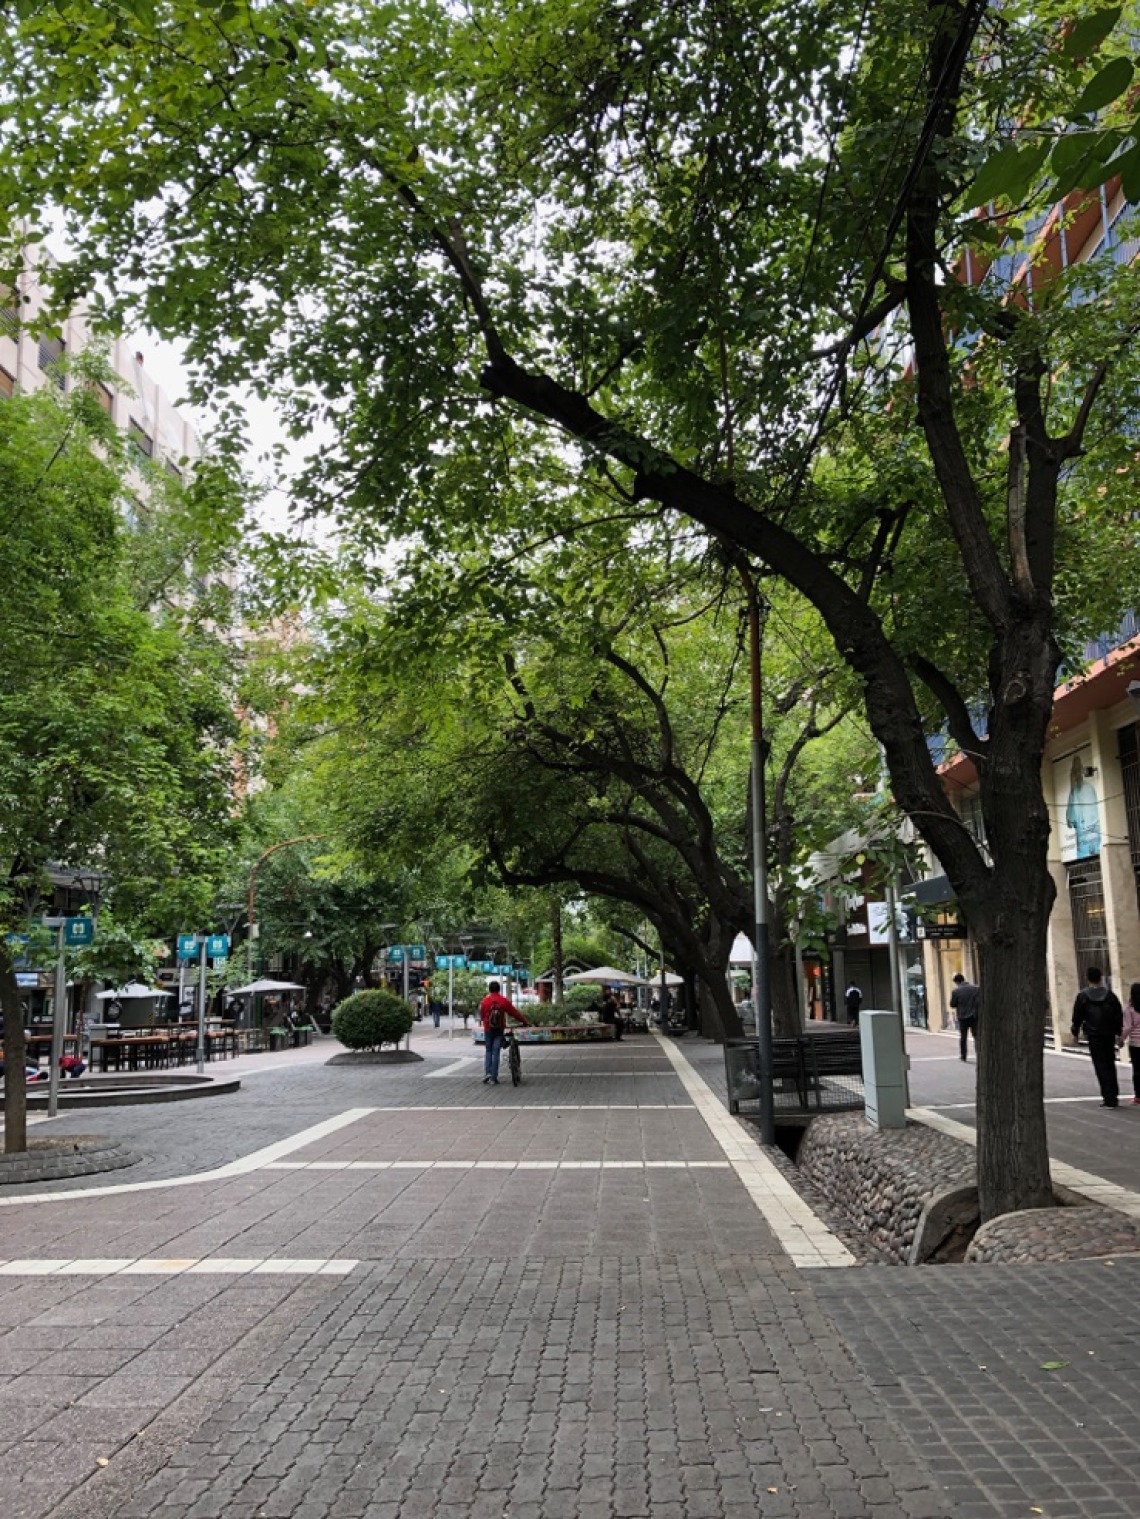 Calle Sarmiento, a pedestrian street in Mendoza, Argentina, with acequias – or canals – along the street irrigating trees